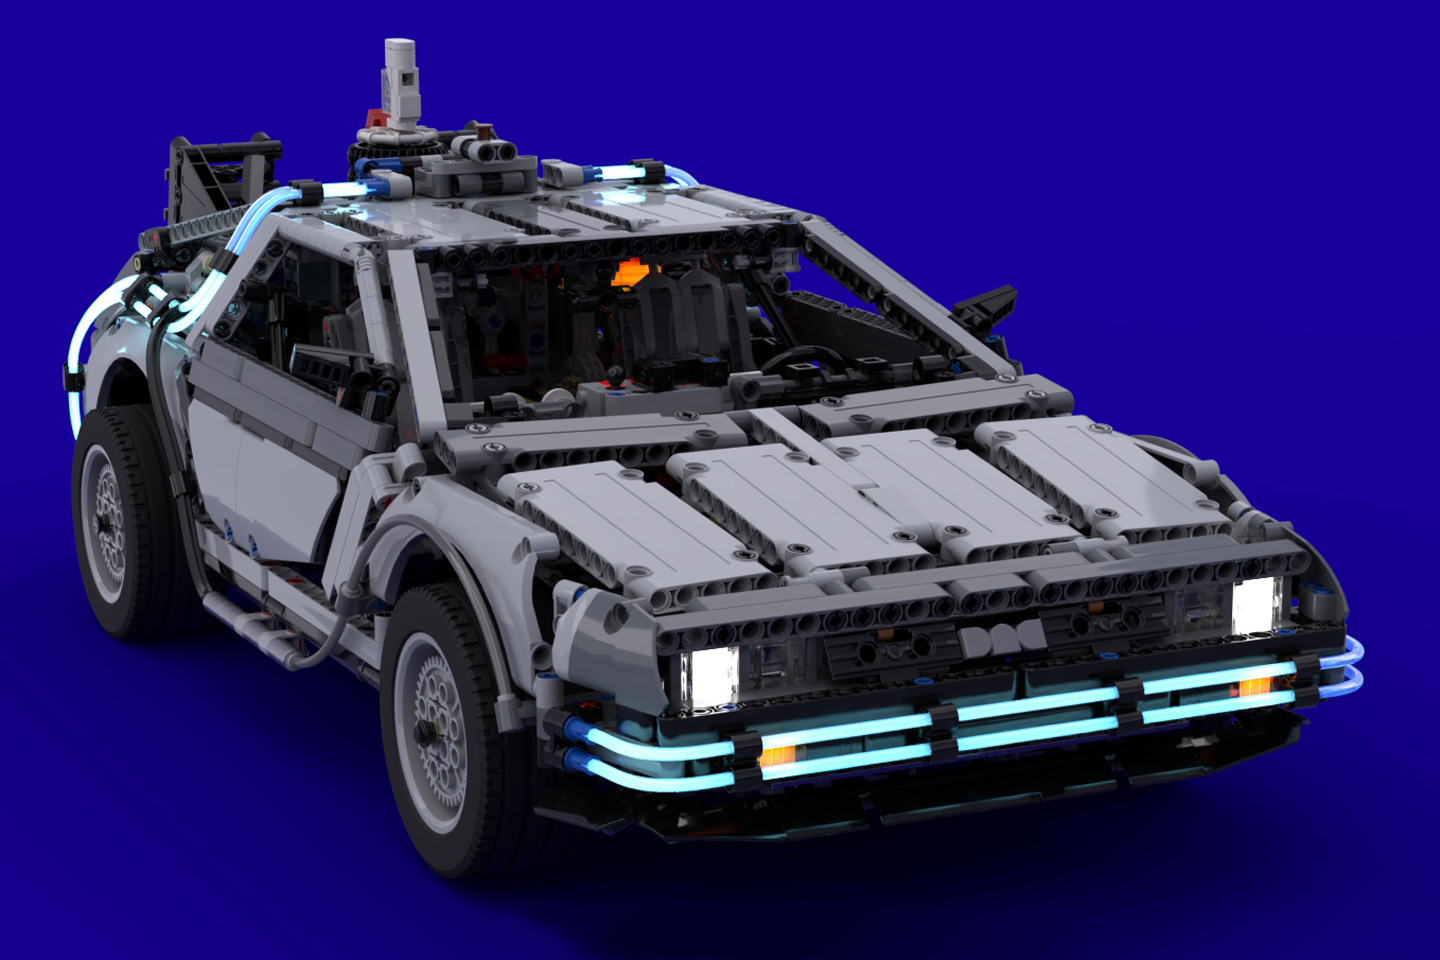 LEGO DeLorean is a stunning replica of the classic with glowing lights